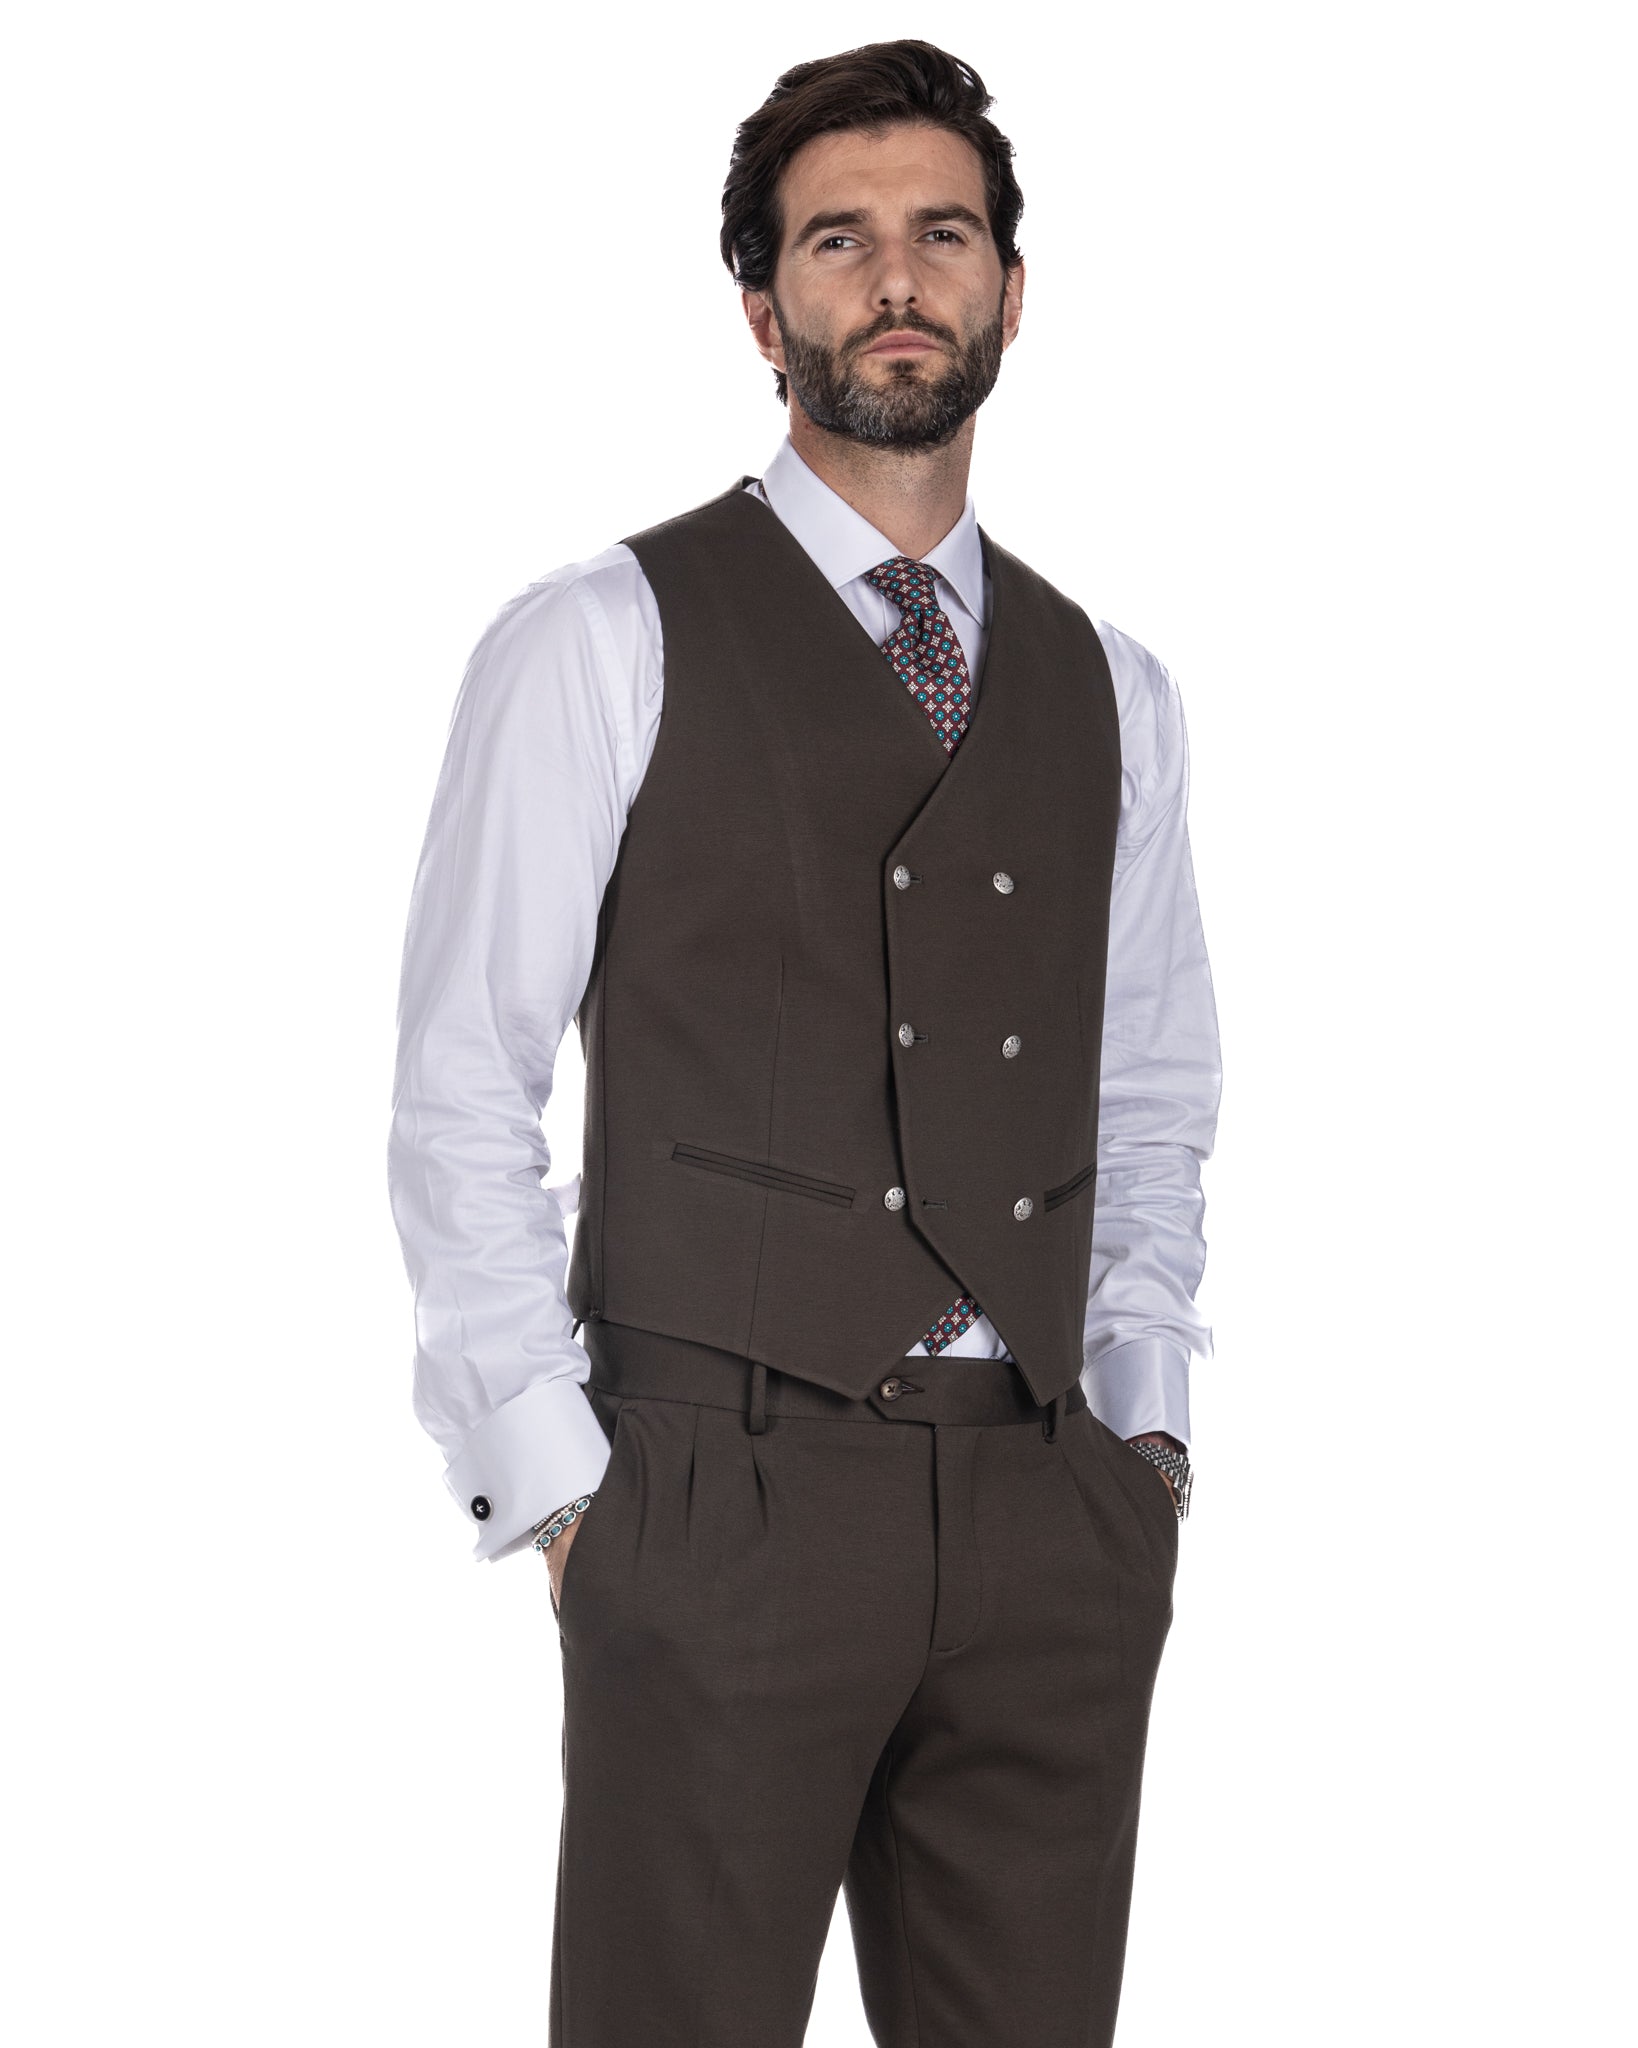 Mustang - double-breasted waistcoat in dark brown Milanese stitch